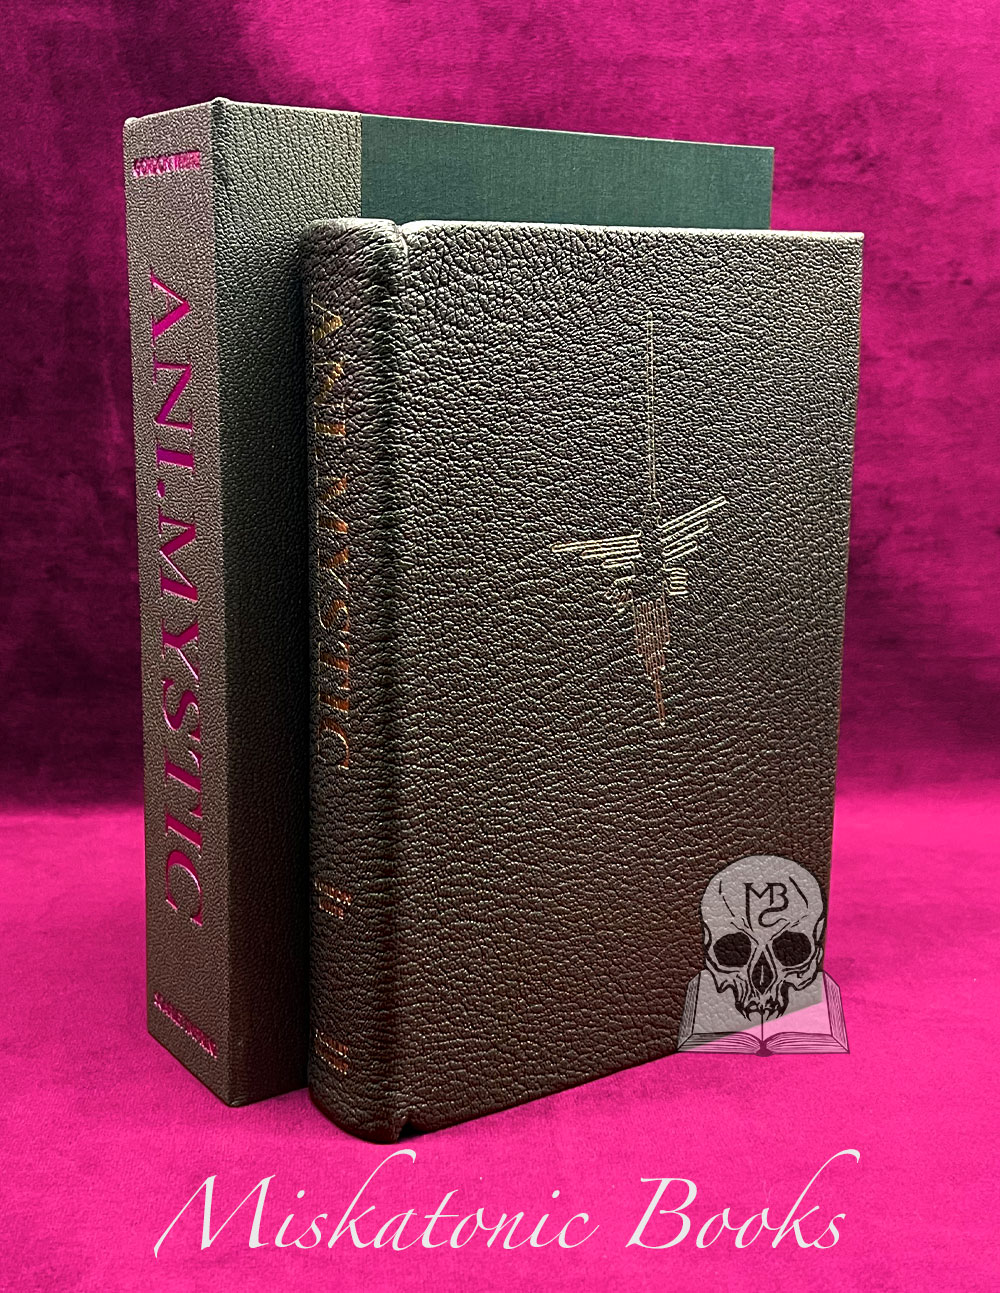 ANI.MYSTIC by Gordon White - Deluxe Leather Bound Limited Edition Hardcover in Custom Solander Box